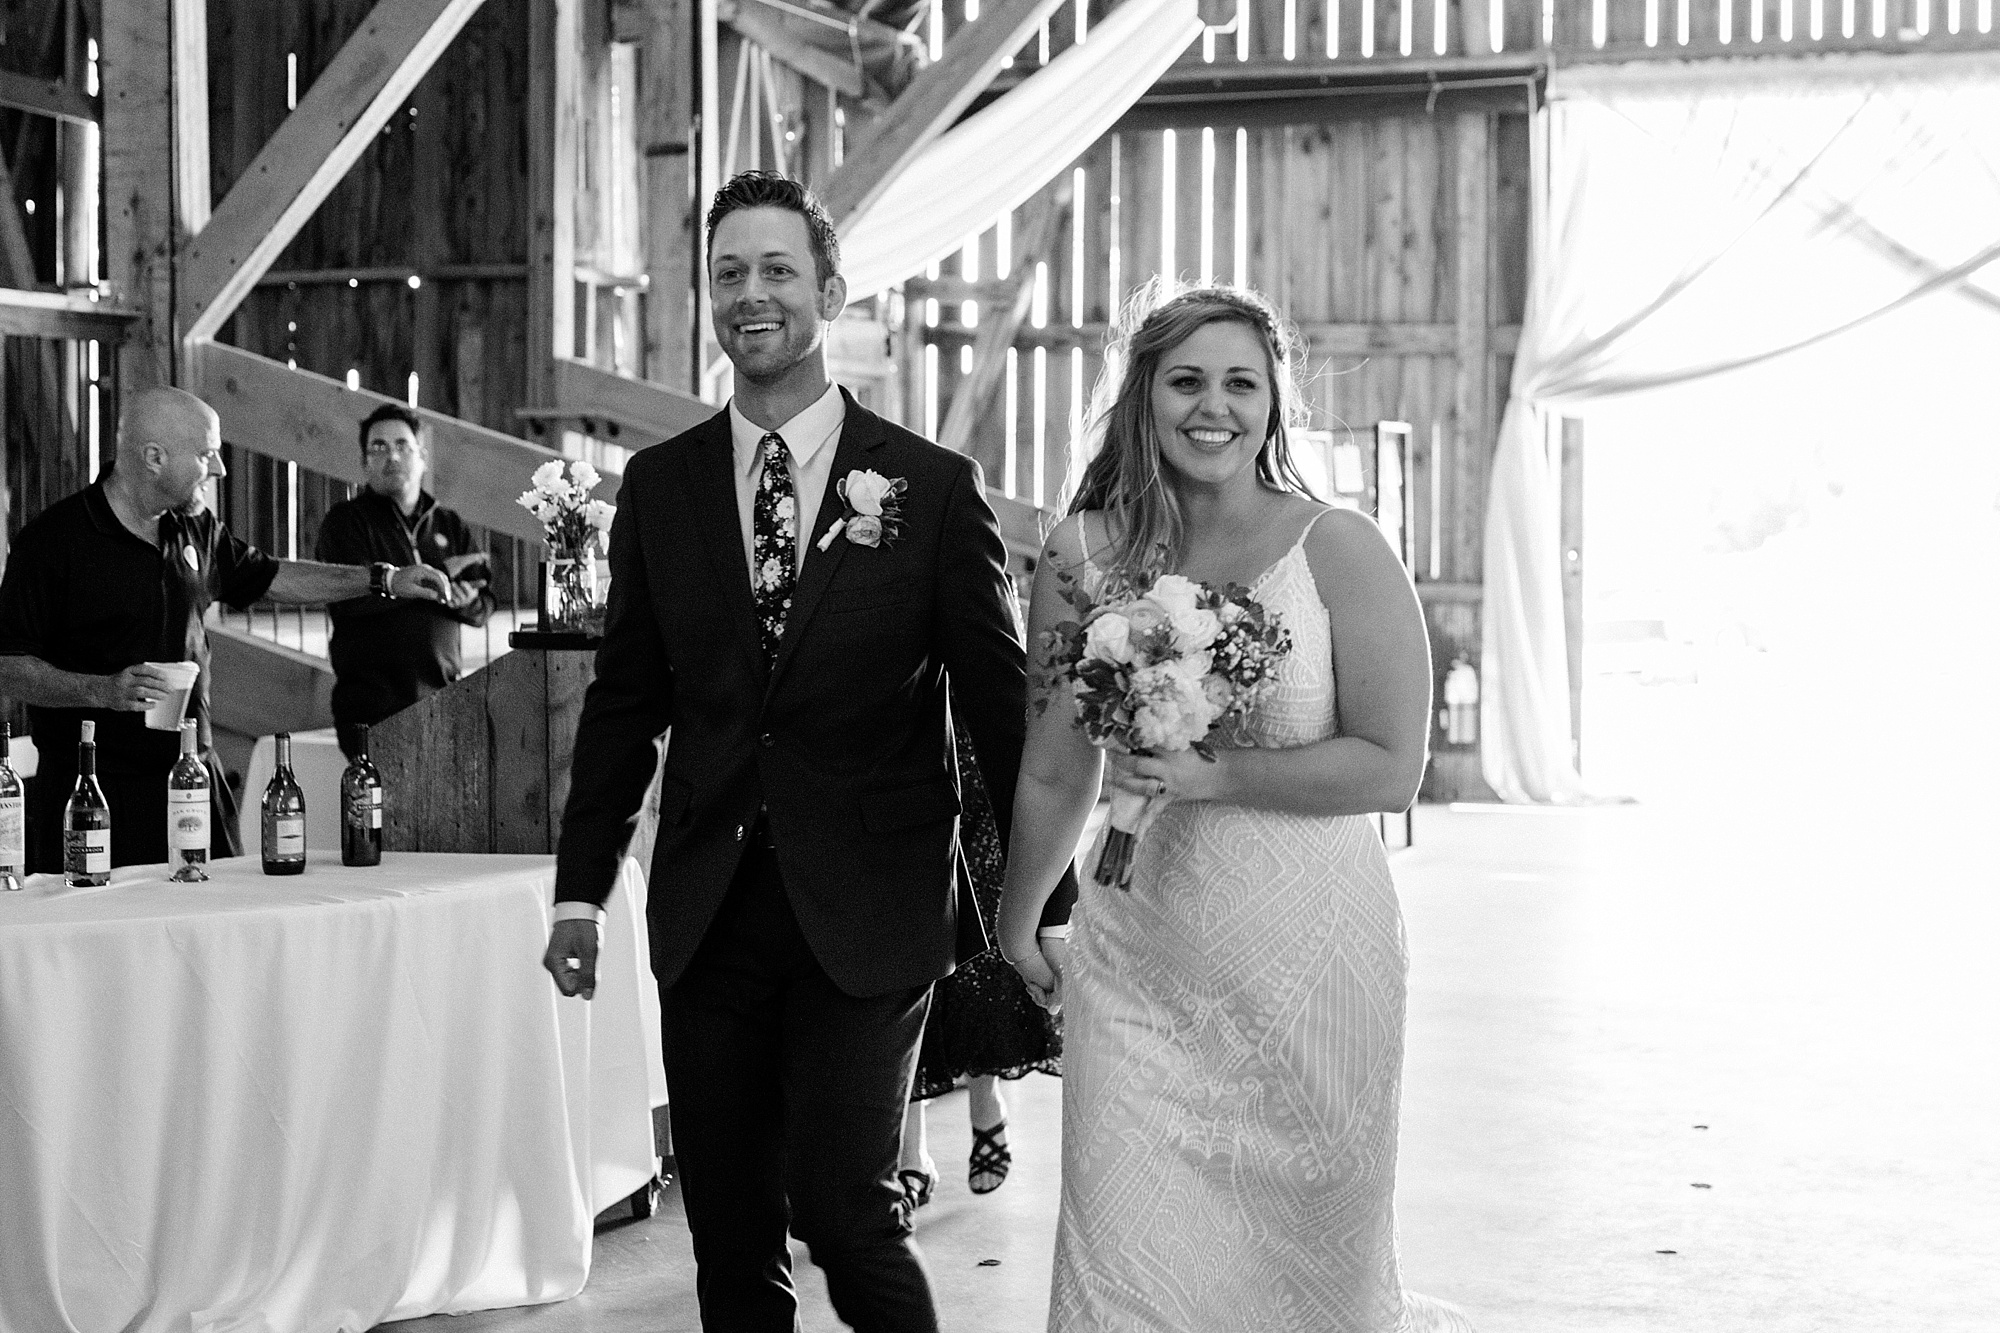 A sunny spring wedding at Shanahan’s Barn in Charlevoix, Michigan by Breanne Rochelle Photography.